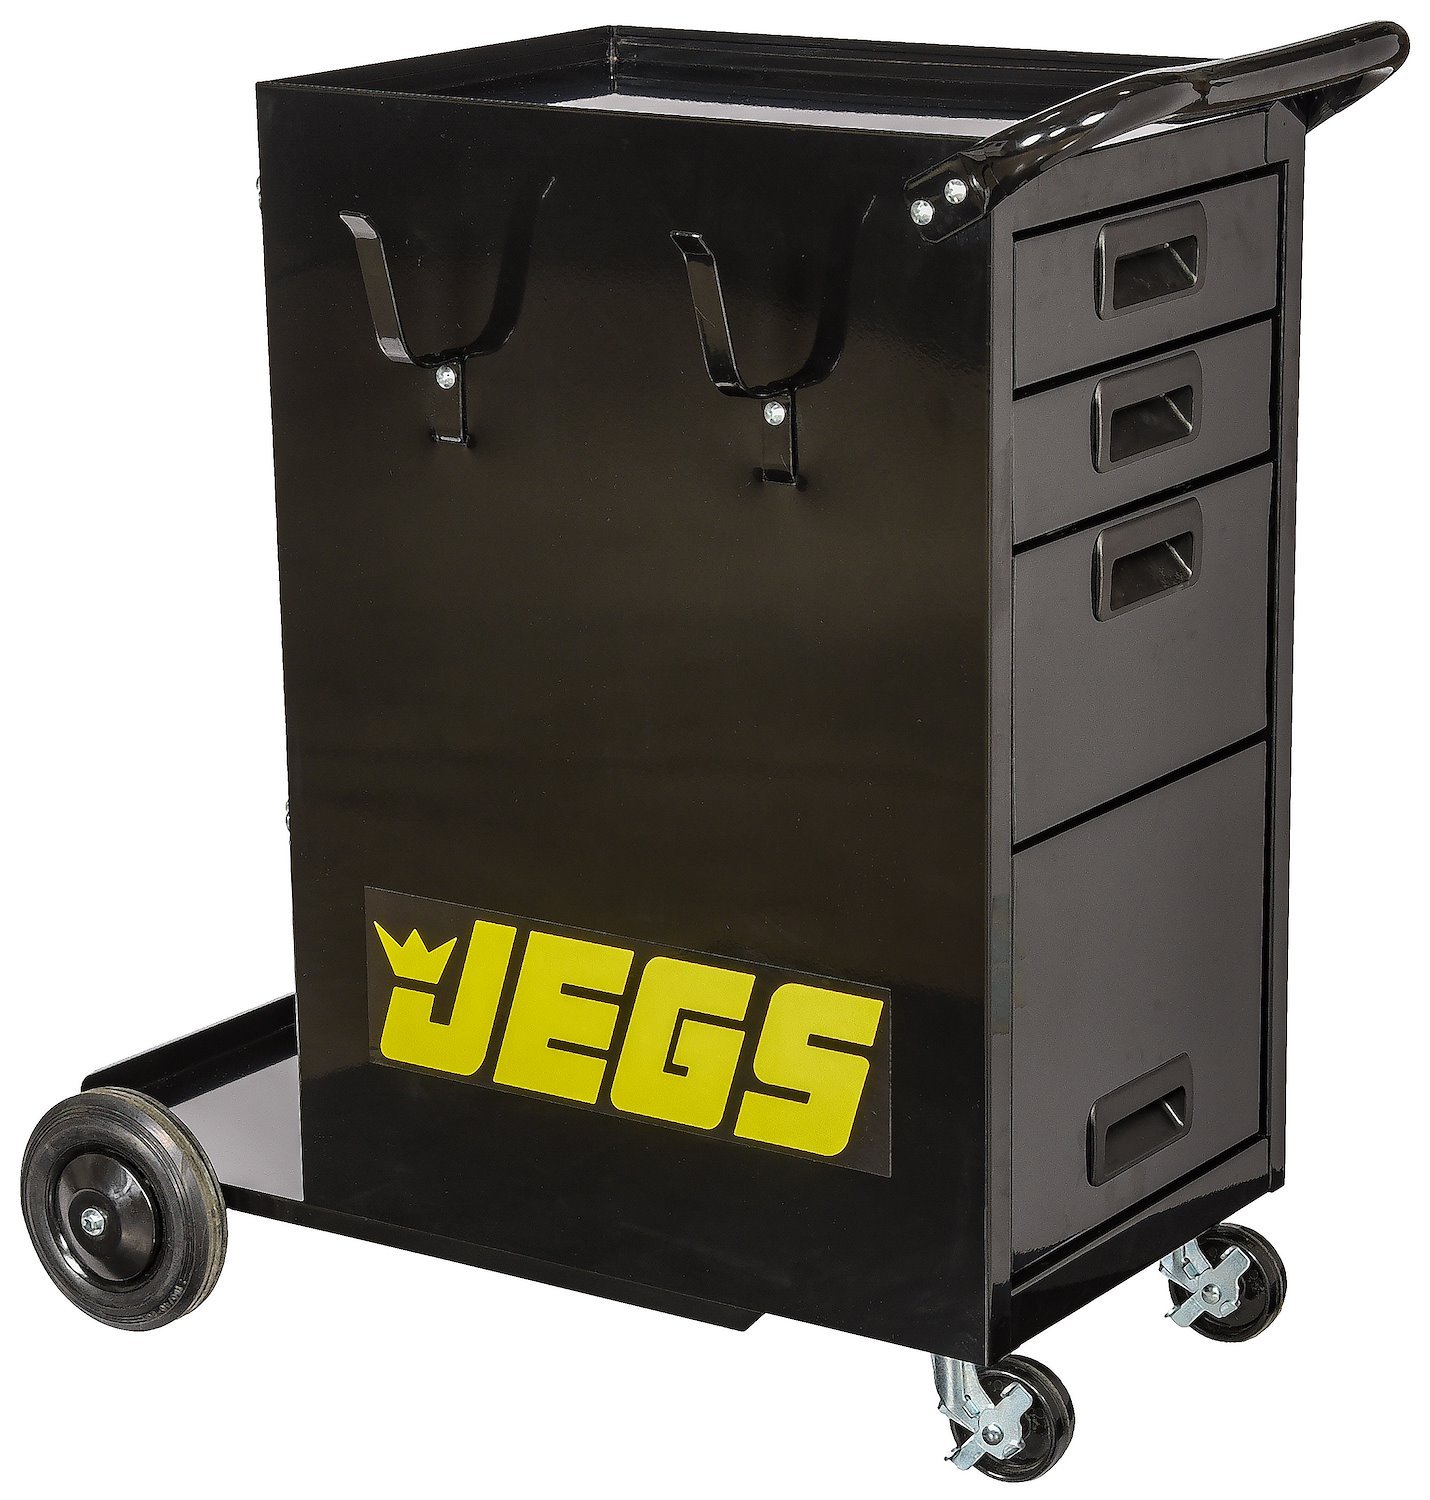 Steel Welding Cart with Drawers (33 1/2 in. L x 18 1/2 in. W x 33 in. H)